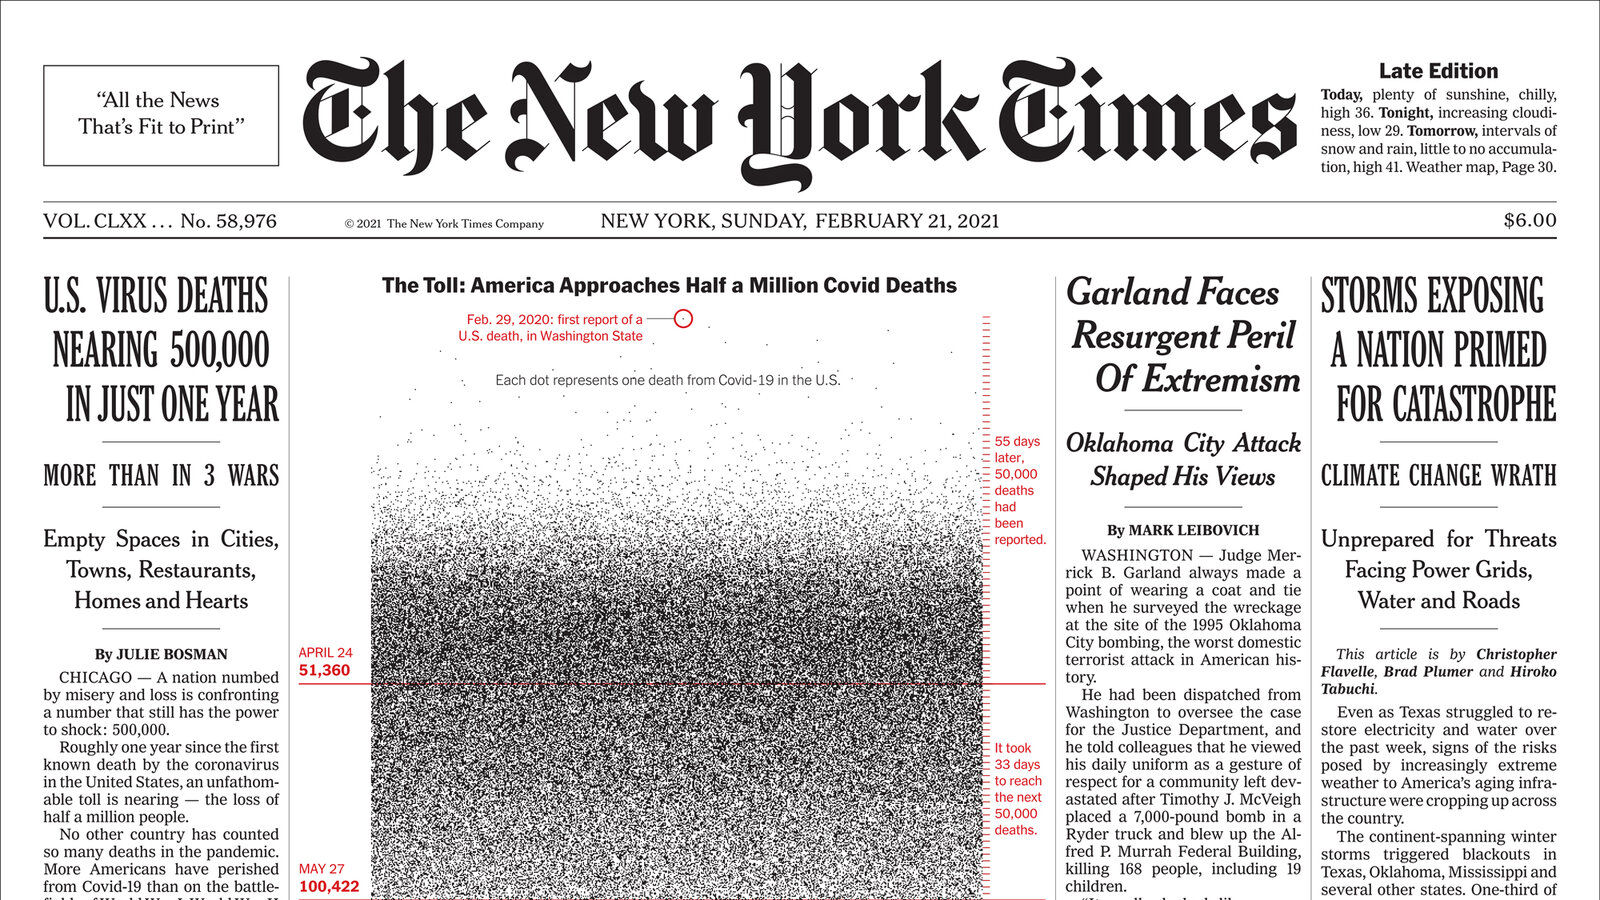 7. The New York Times